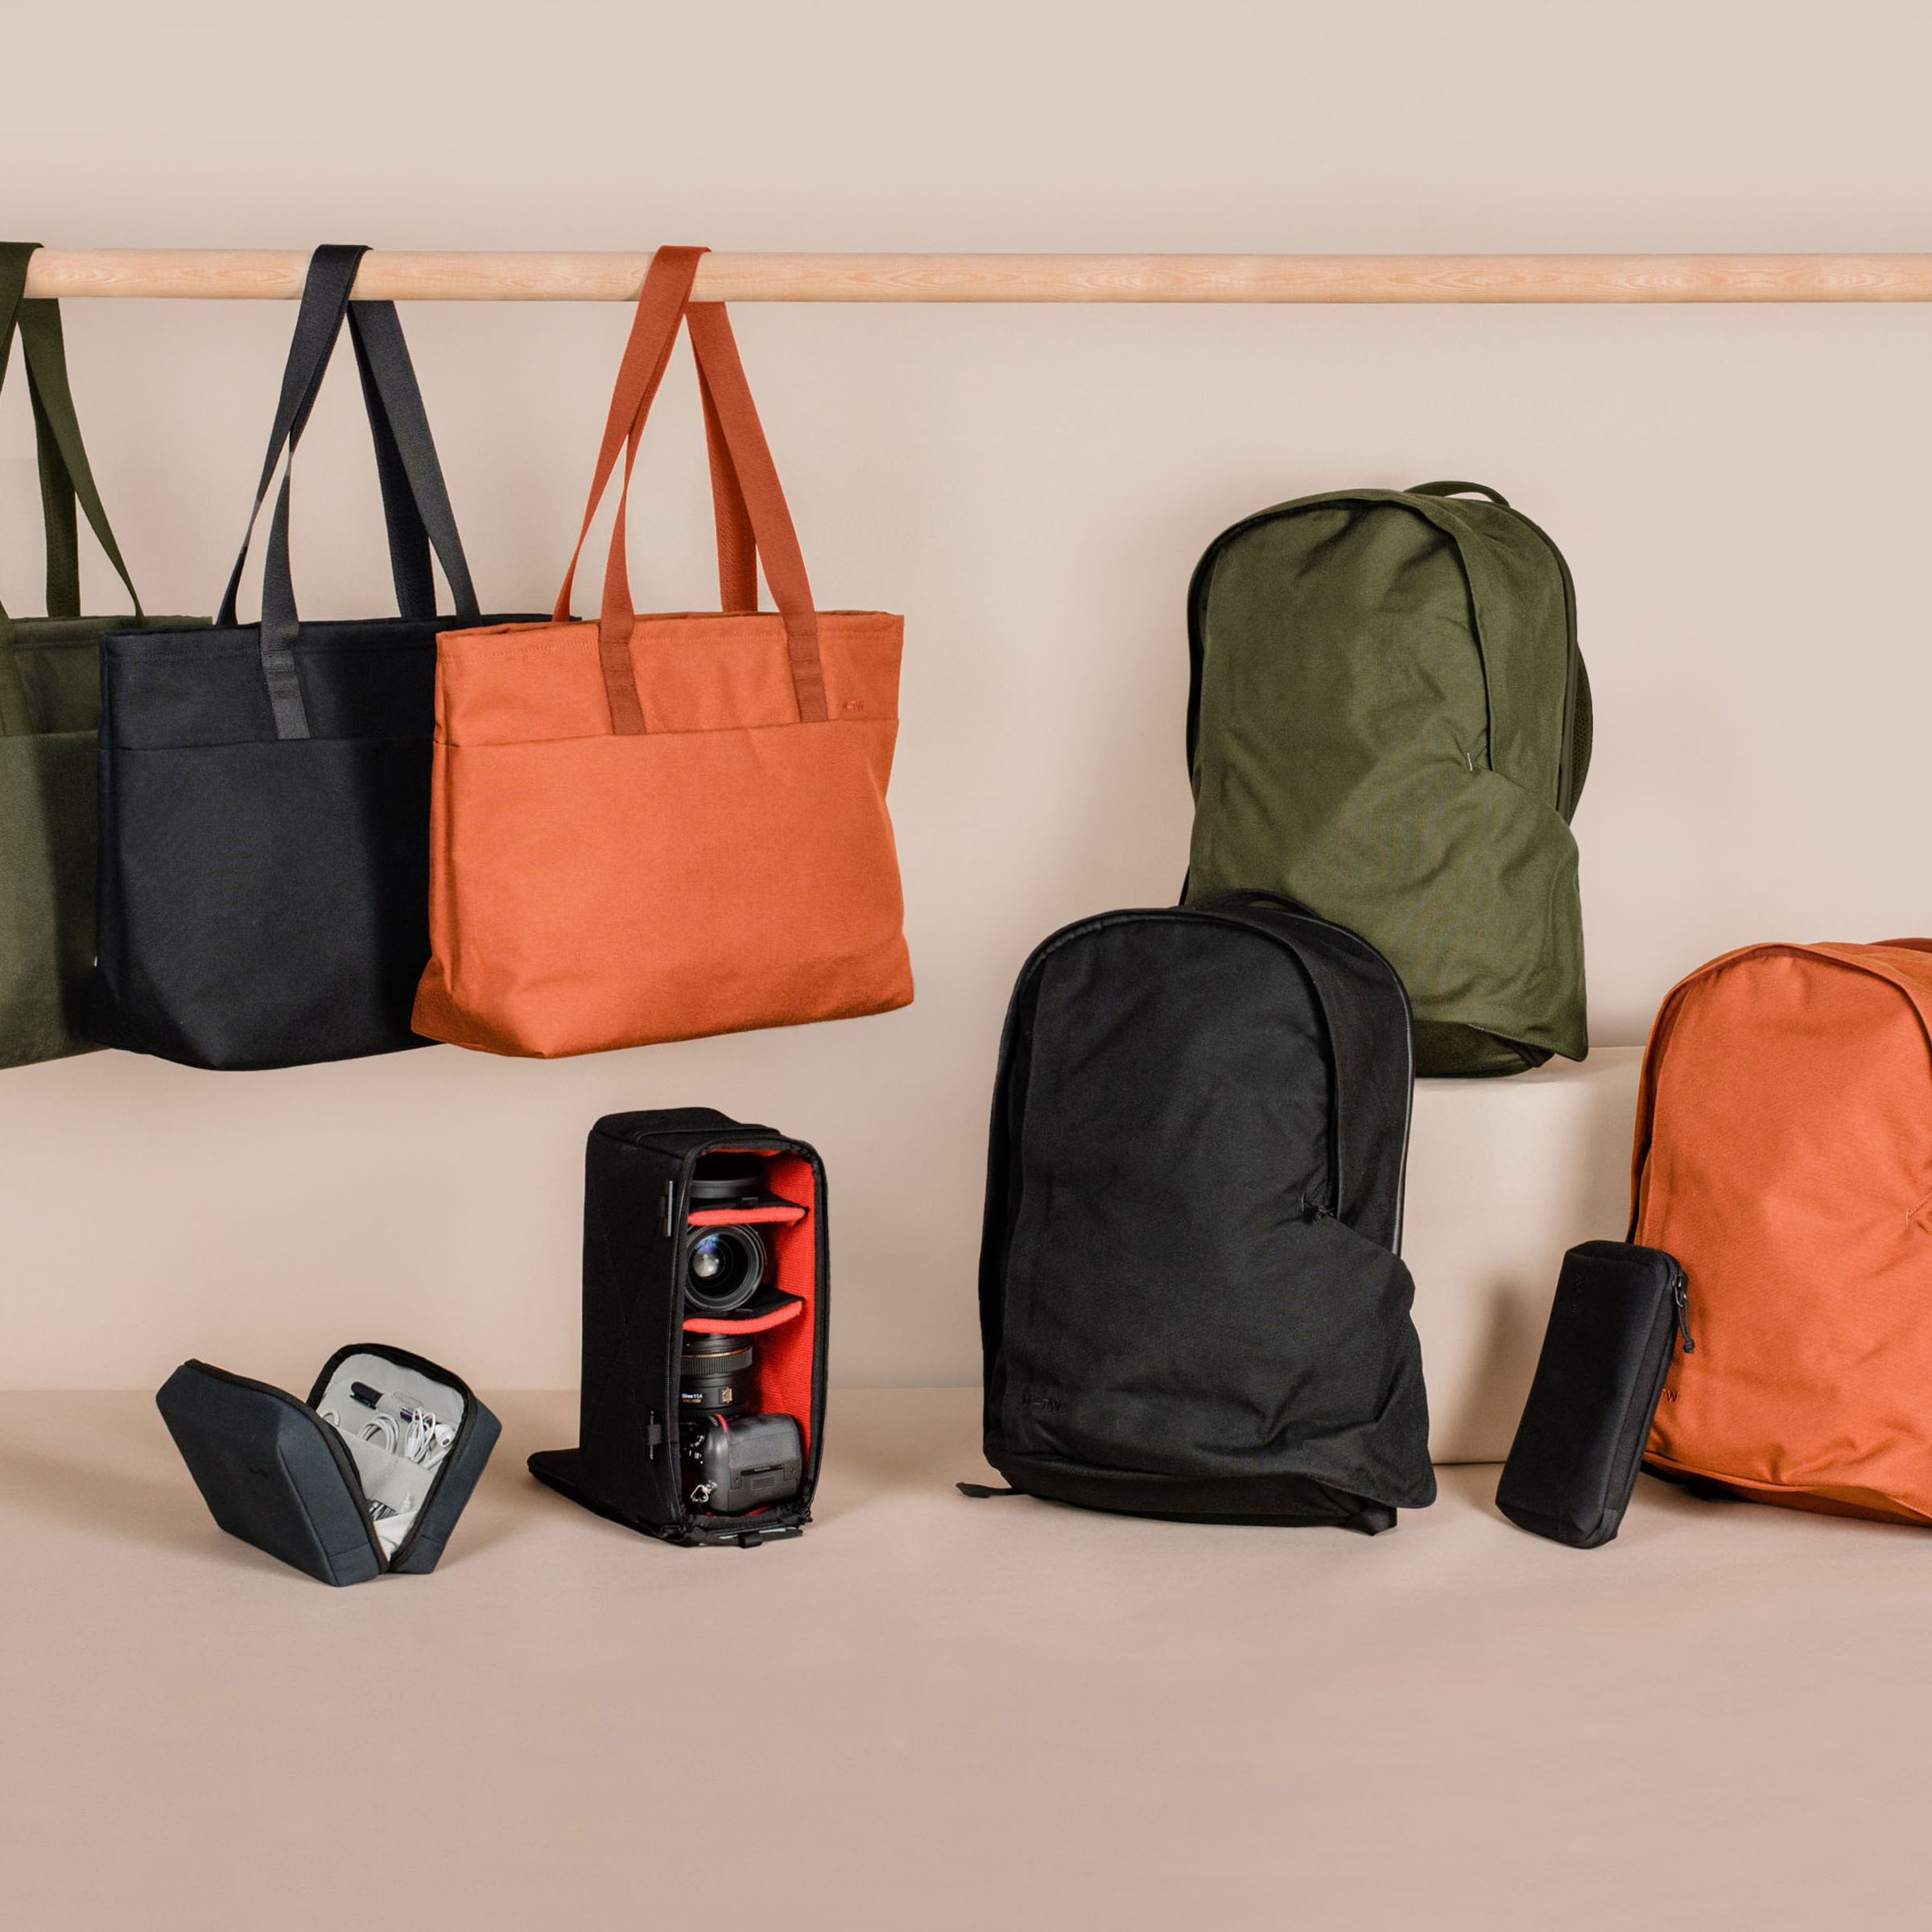 Moment’s new line of Travelwear bags.